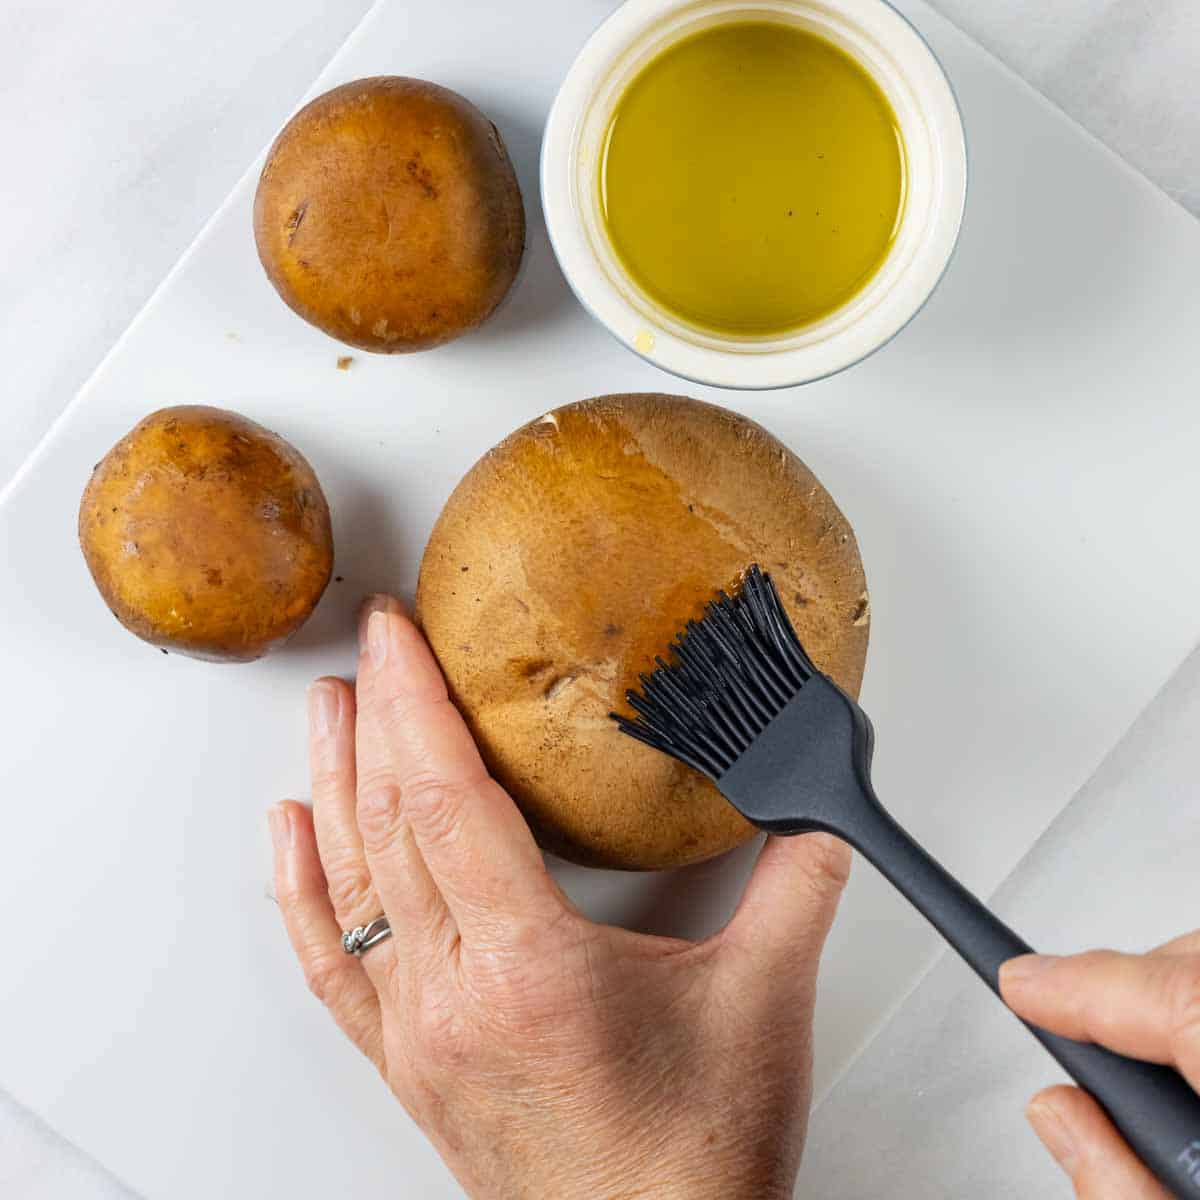 Hands brushing tops of mushrooms with olive oil using a basting brush.